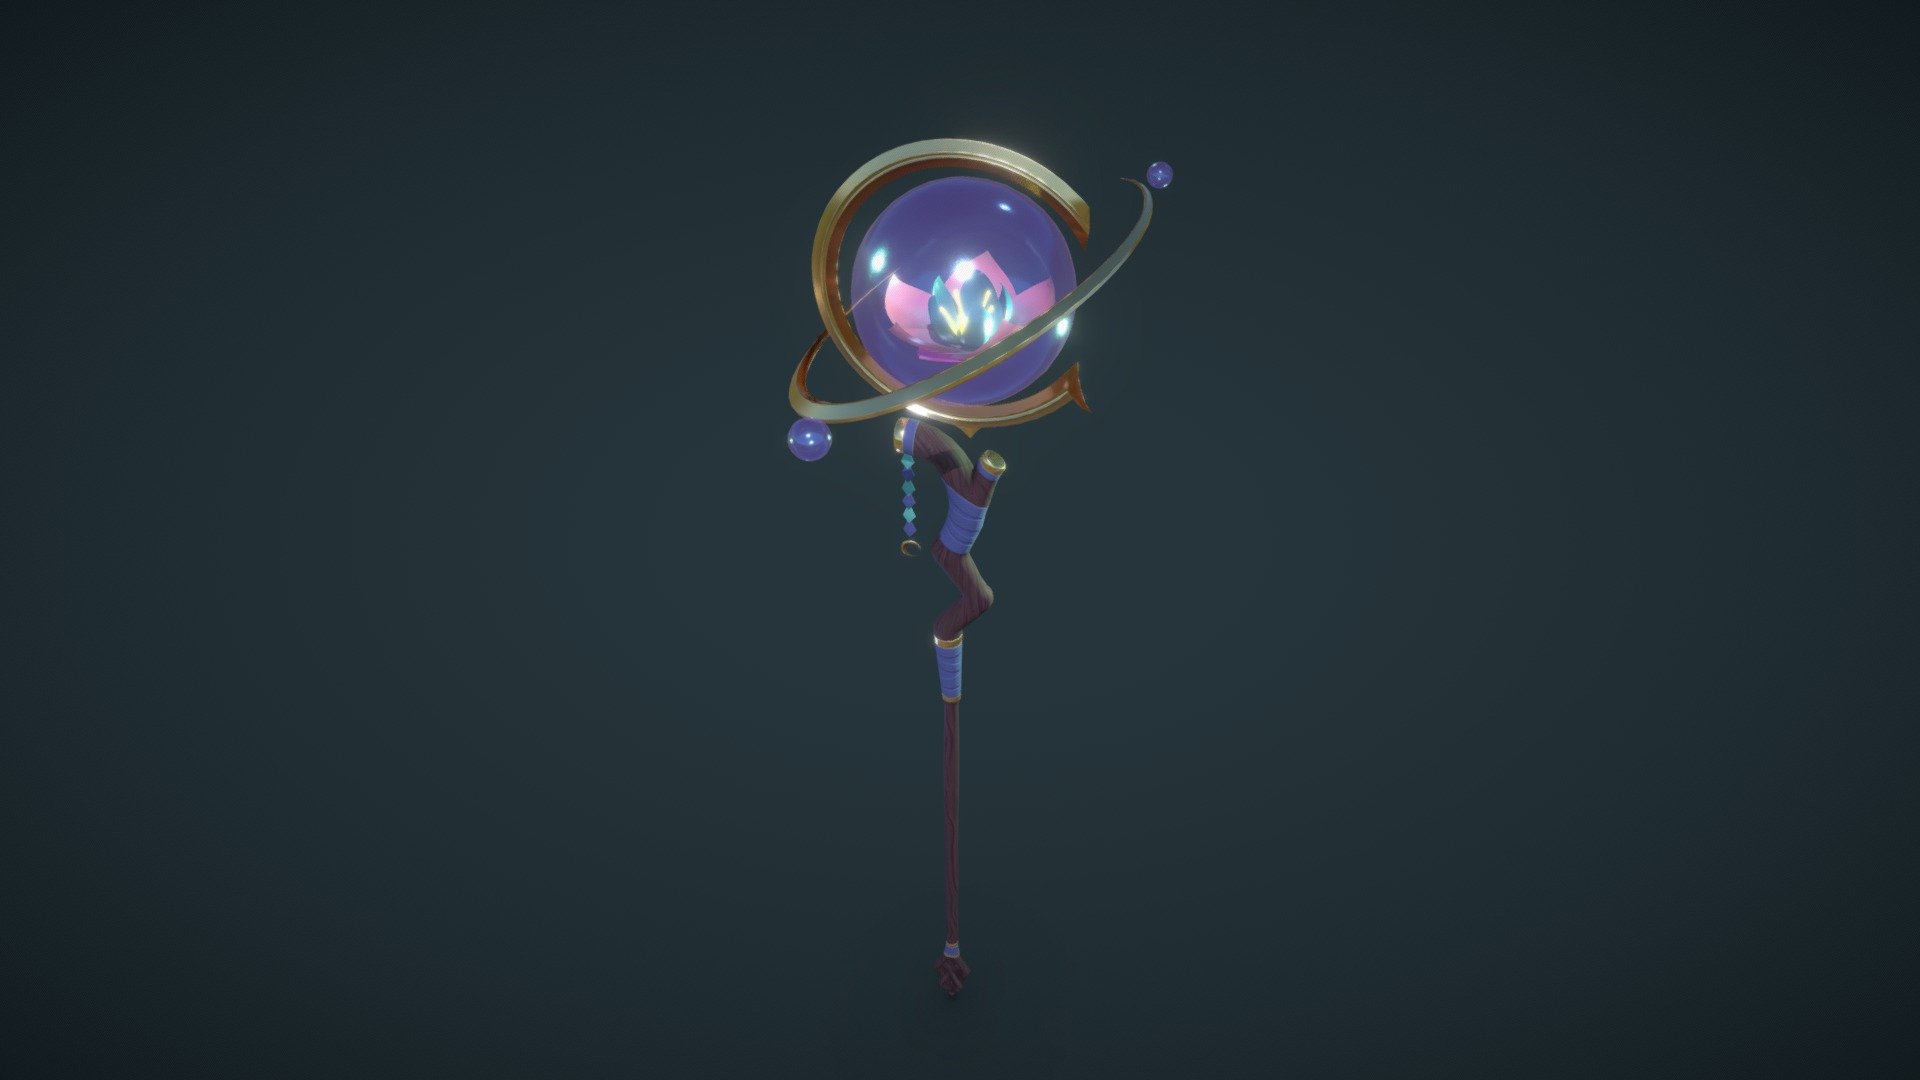 Spirit blossom Soraka staff based from Pd &amp; Wolf concept : https://twitter.com/Pdwolf_0925/status/1293026968040960000
Modelled in 3Ds Max and textured in Substance Painter - Spirit blossom Soraka staff - Download Free 3D model by Nila (@nila_3d) 3d model